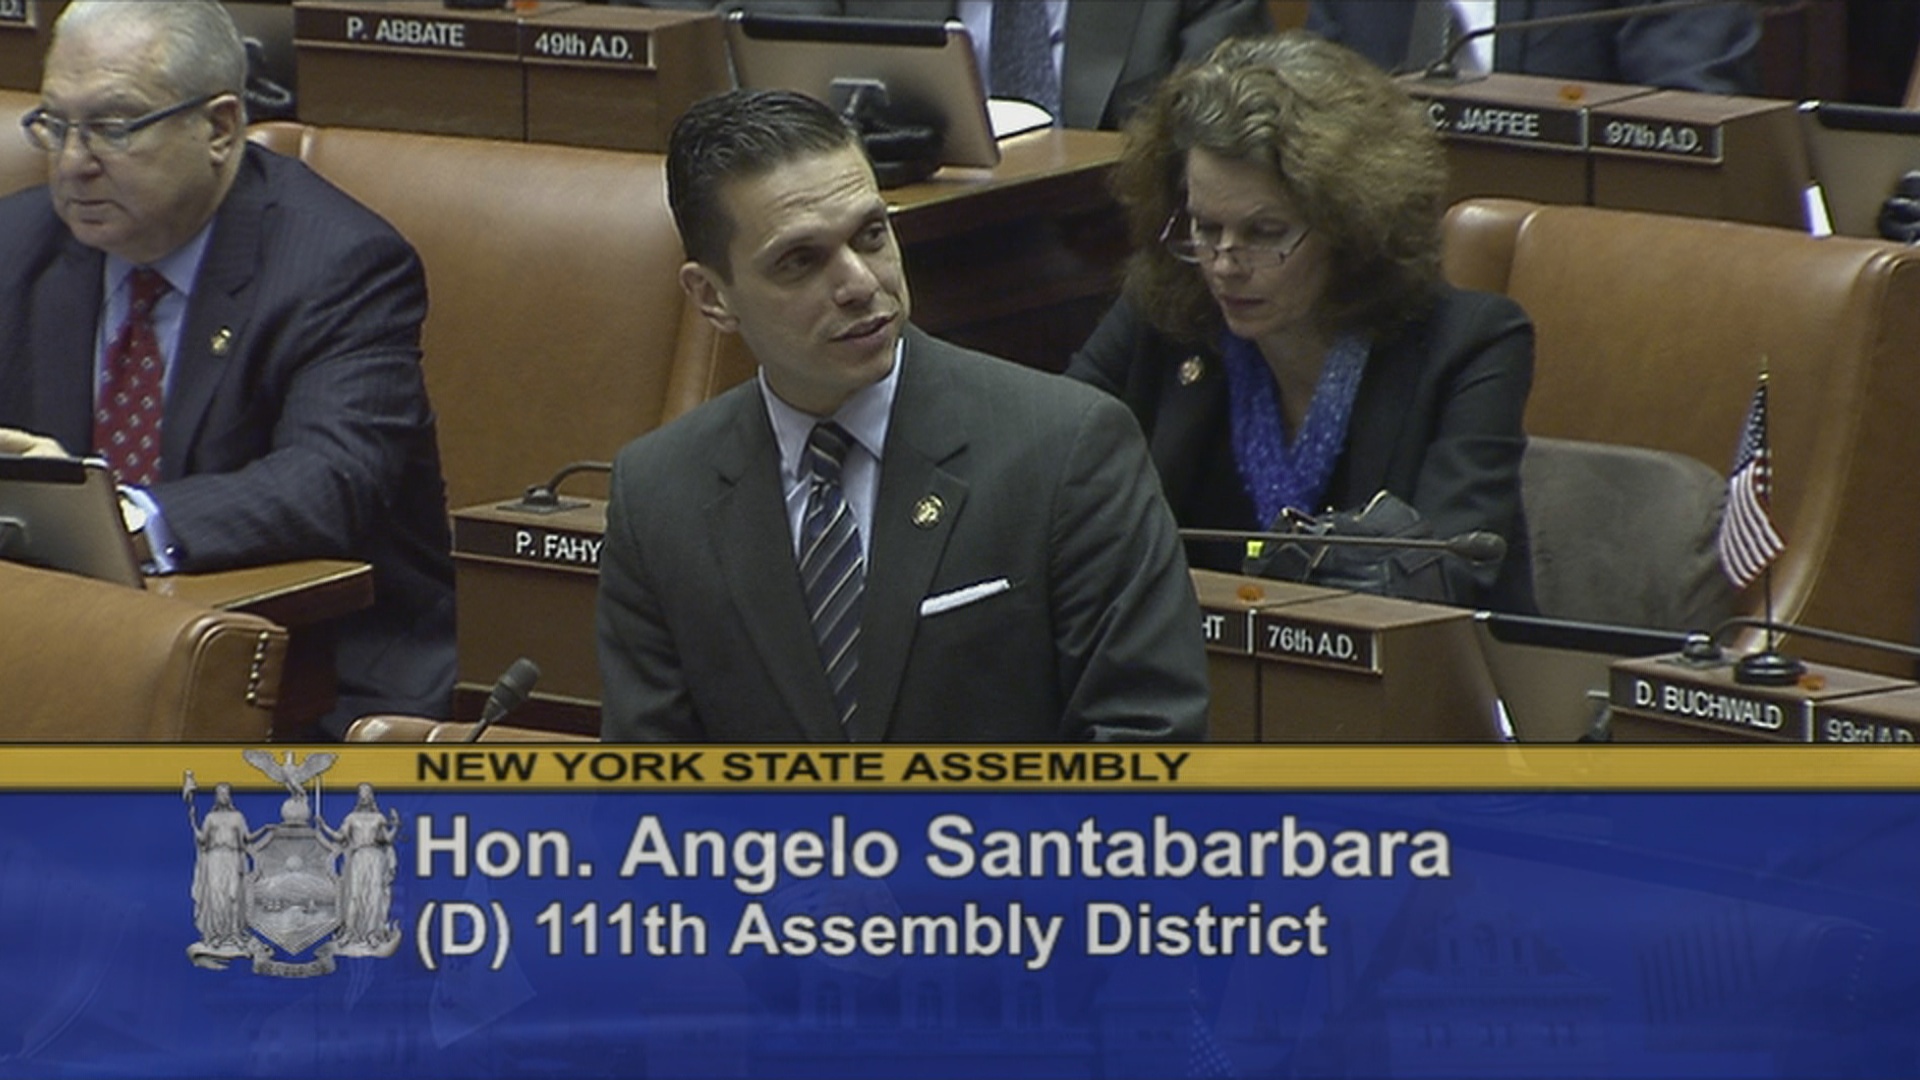 Assemblyman Santabarbara Welcomes Distinguished Guests to the Assembly